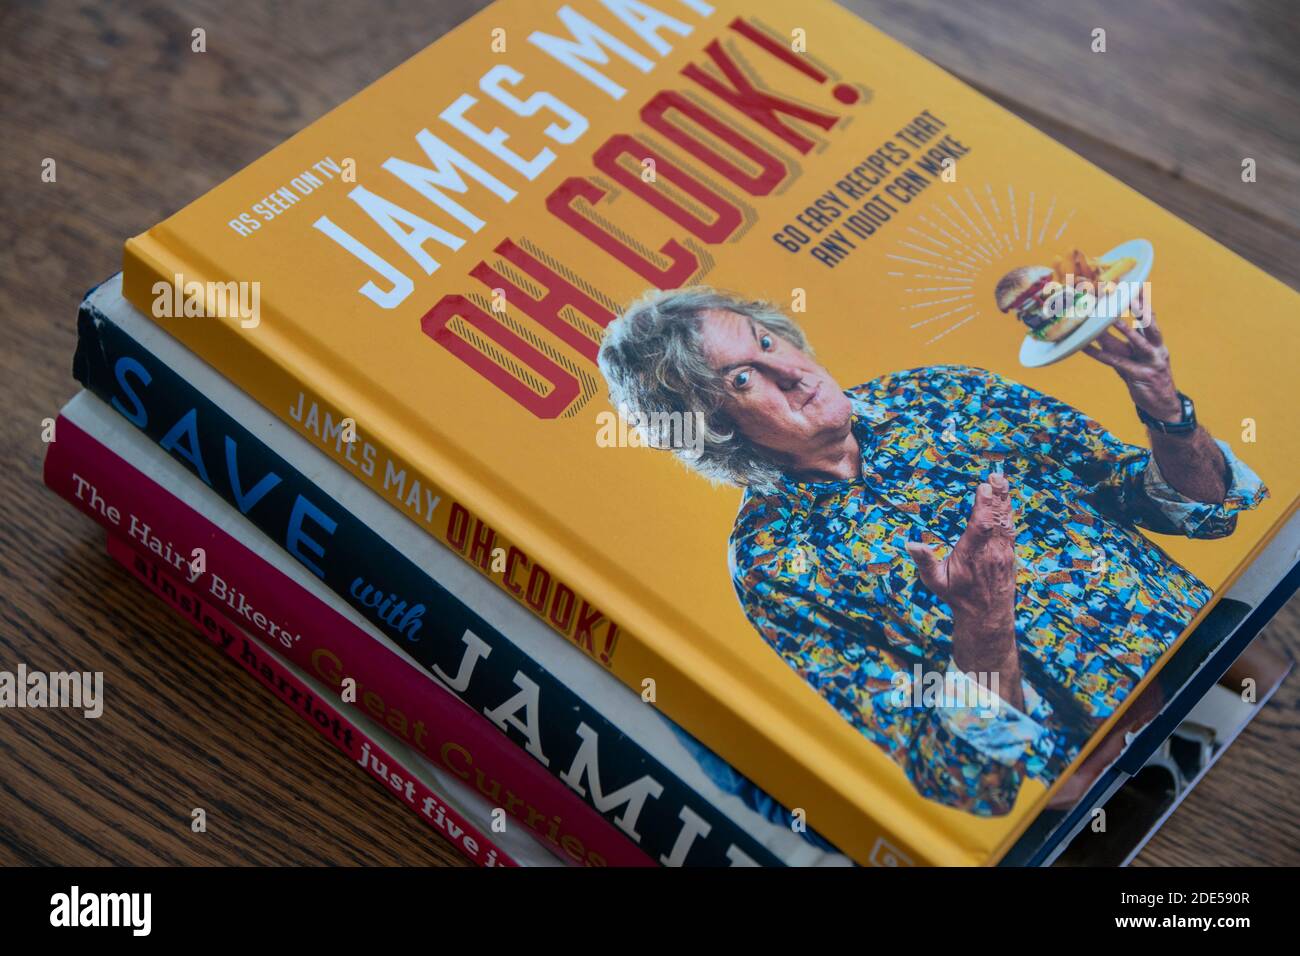 Durham, UK - 17 Nov 2020: Pile of celebrity cookery book, James May, Jamie Oliver, Hairy Bikers and Ainsley Harriott. Home cooking, recipe planning co Stock Photo